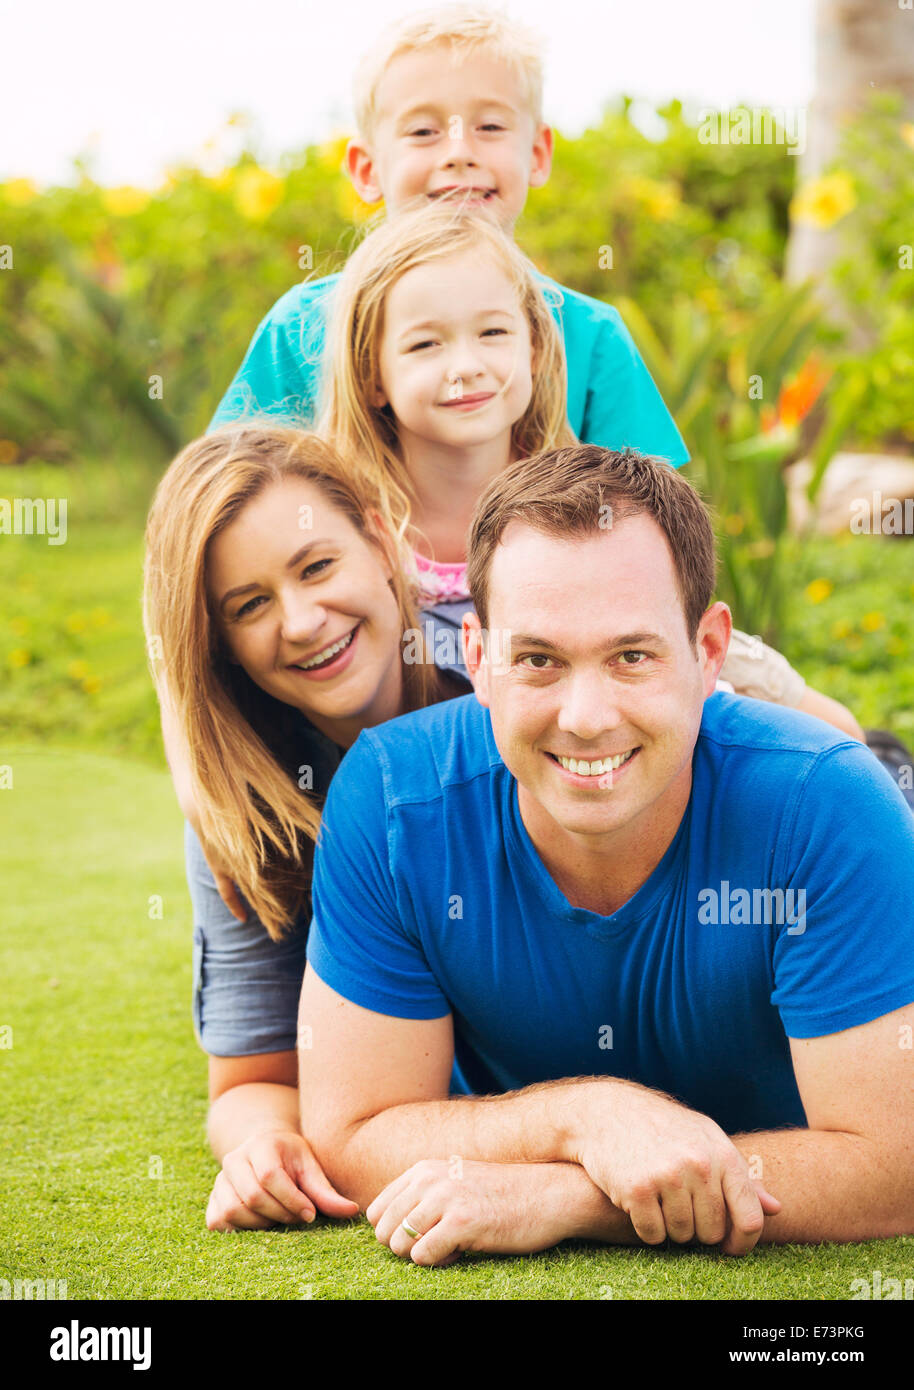 Happy Family Outside on Grass Stock Photo